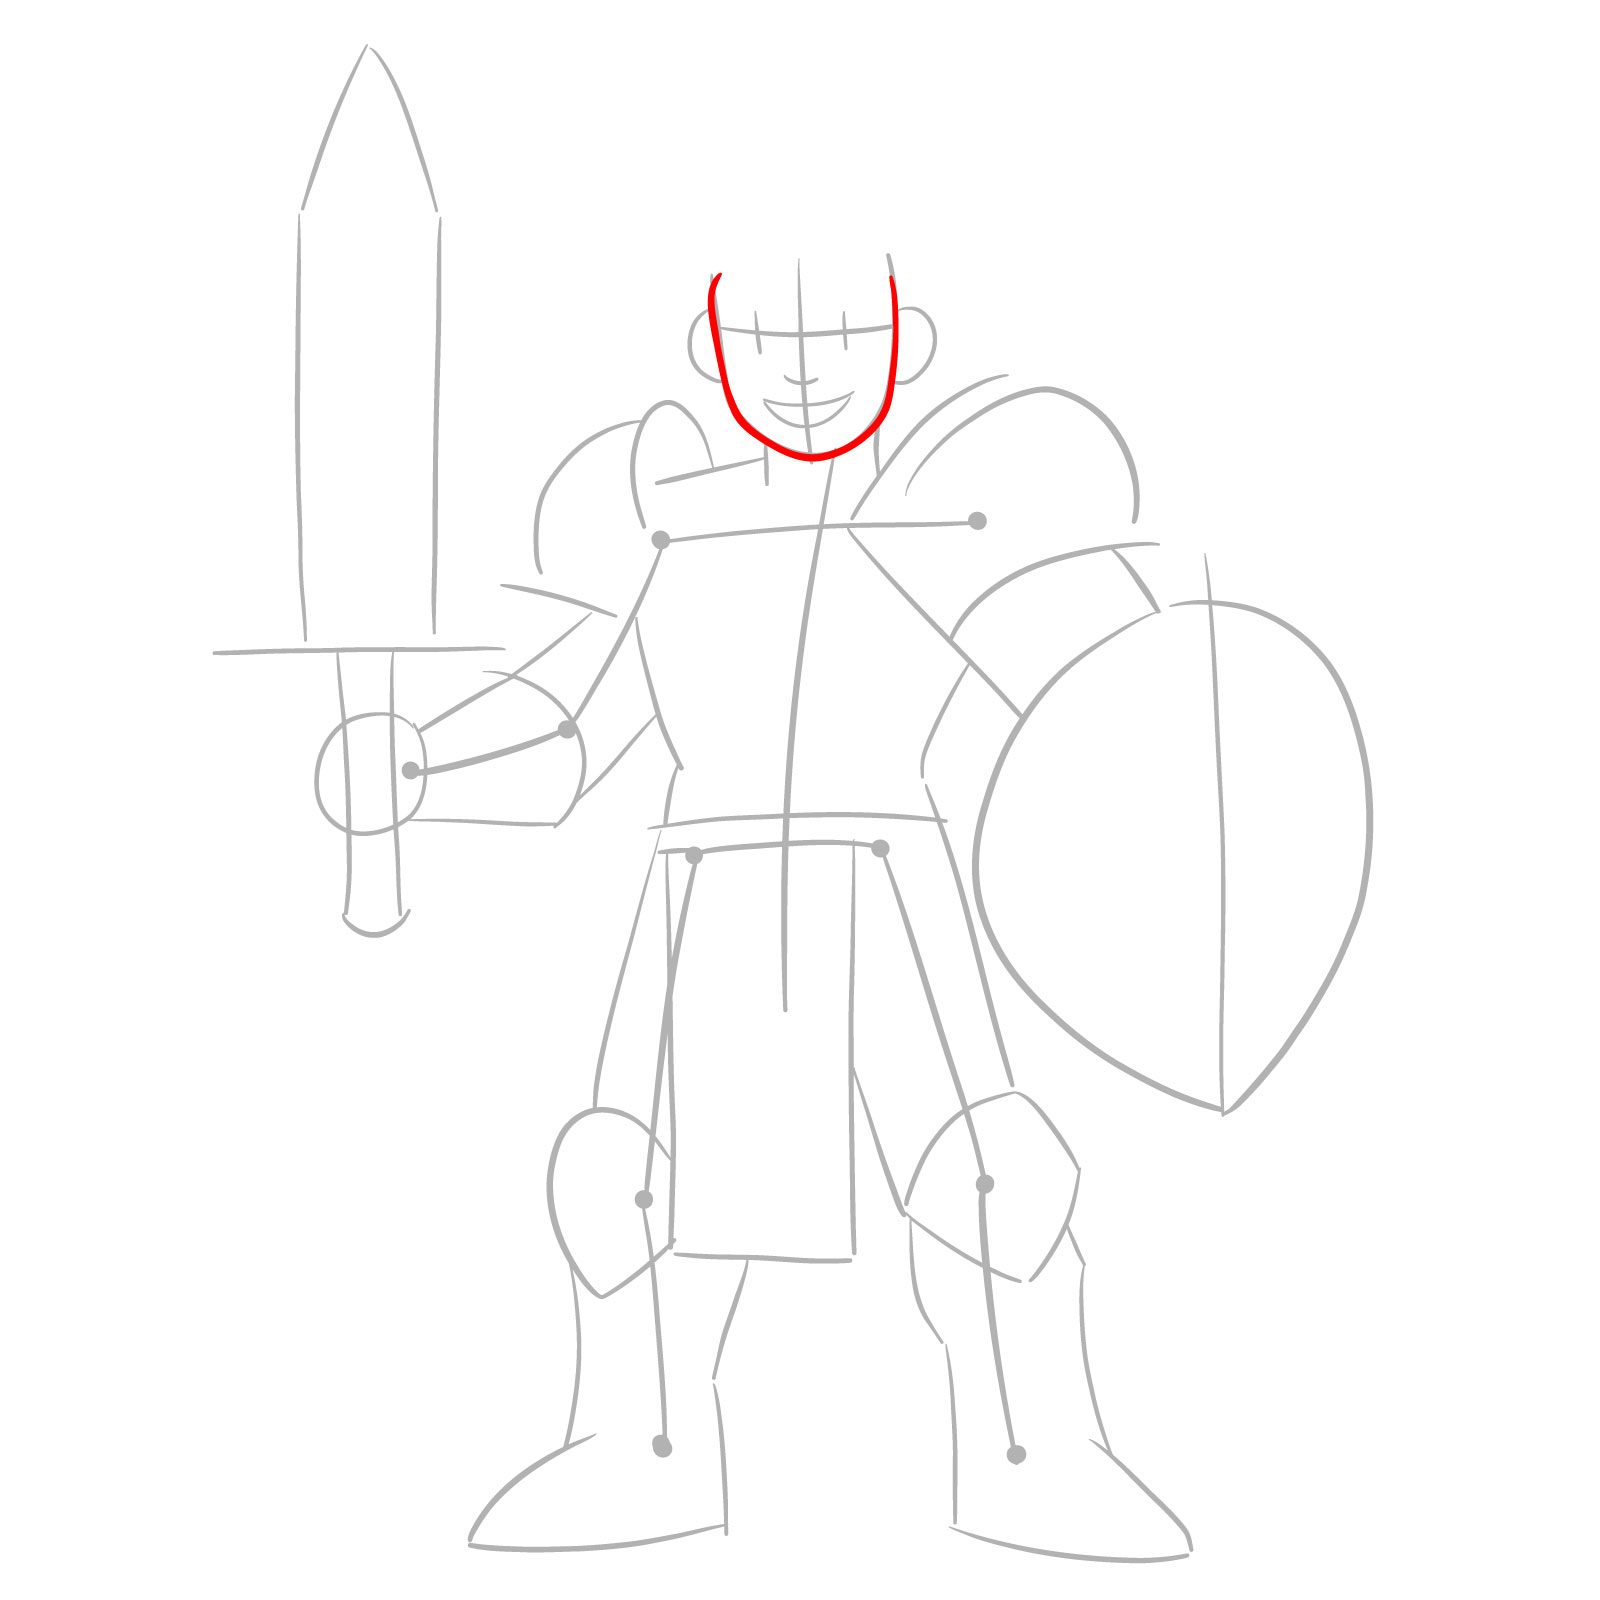 paladin drawing step 4: refining face outline